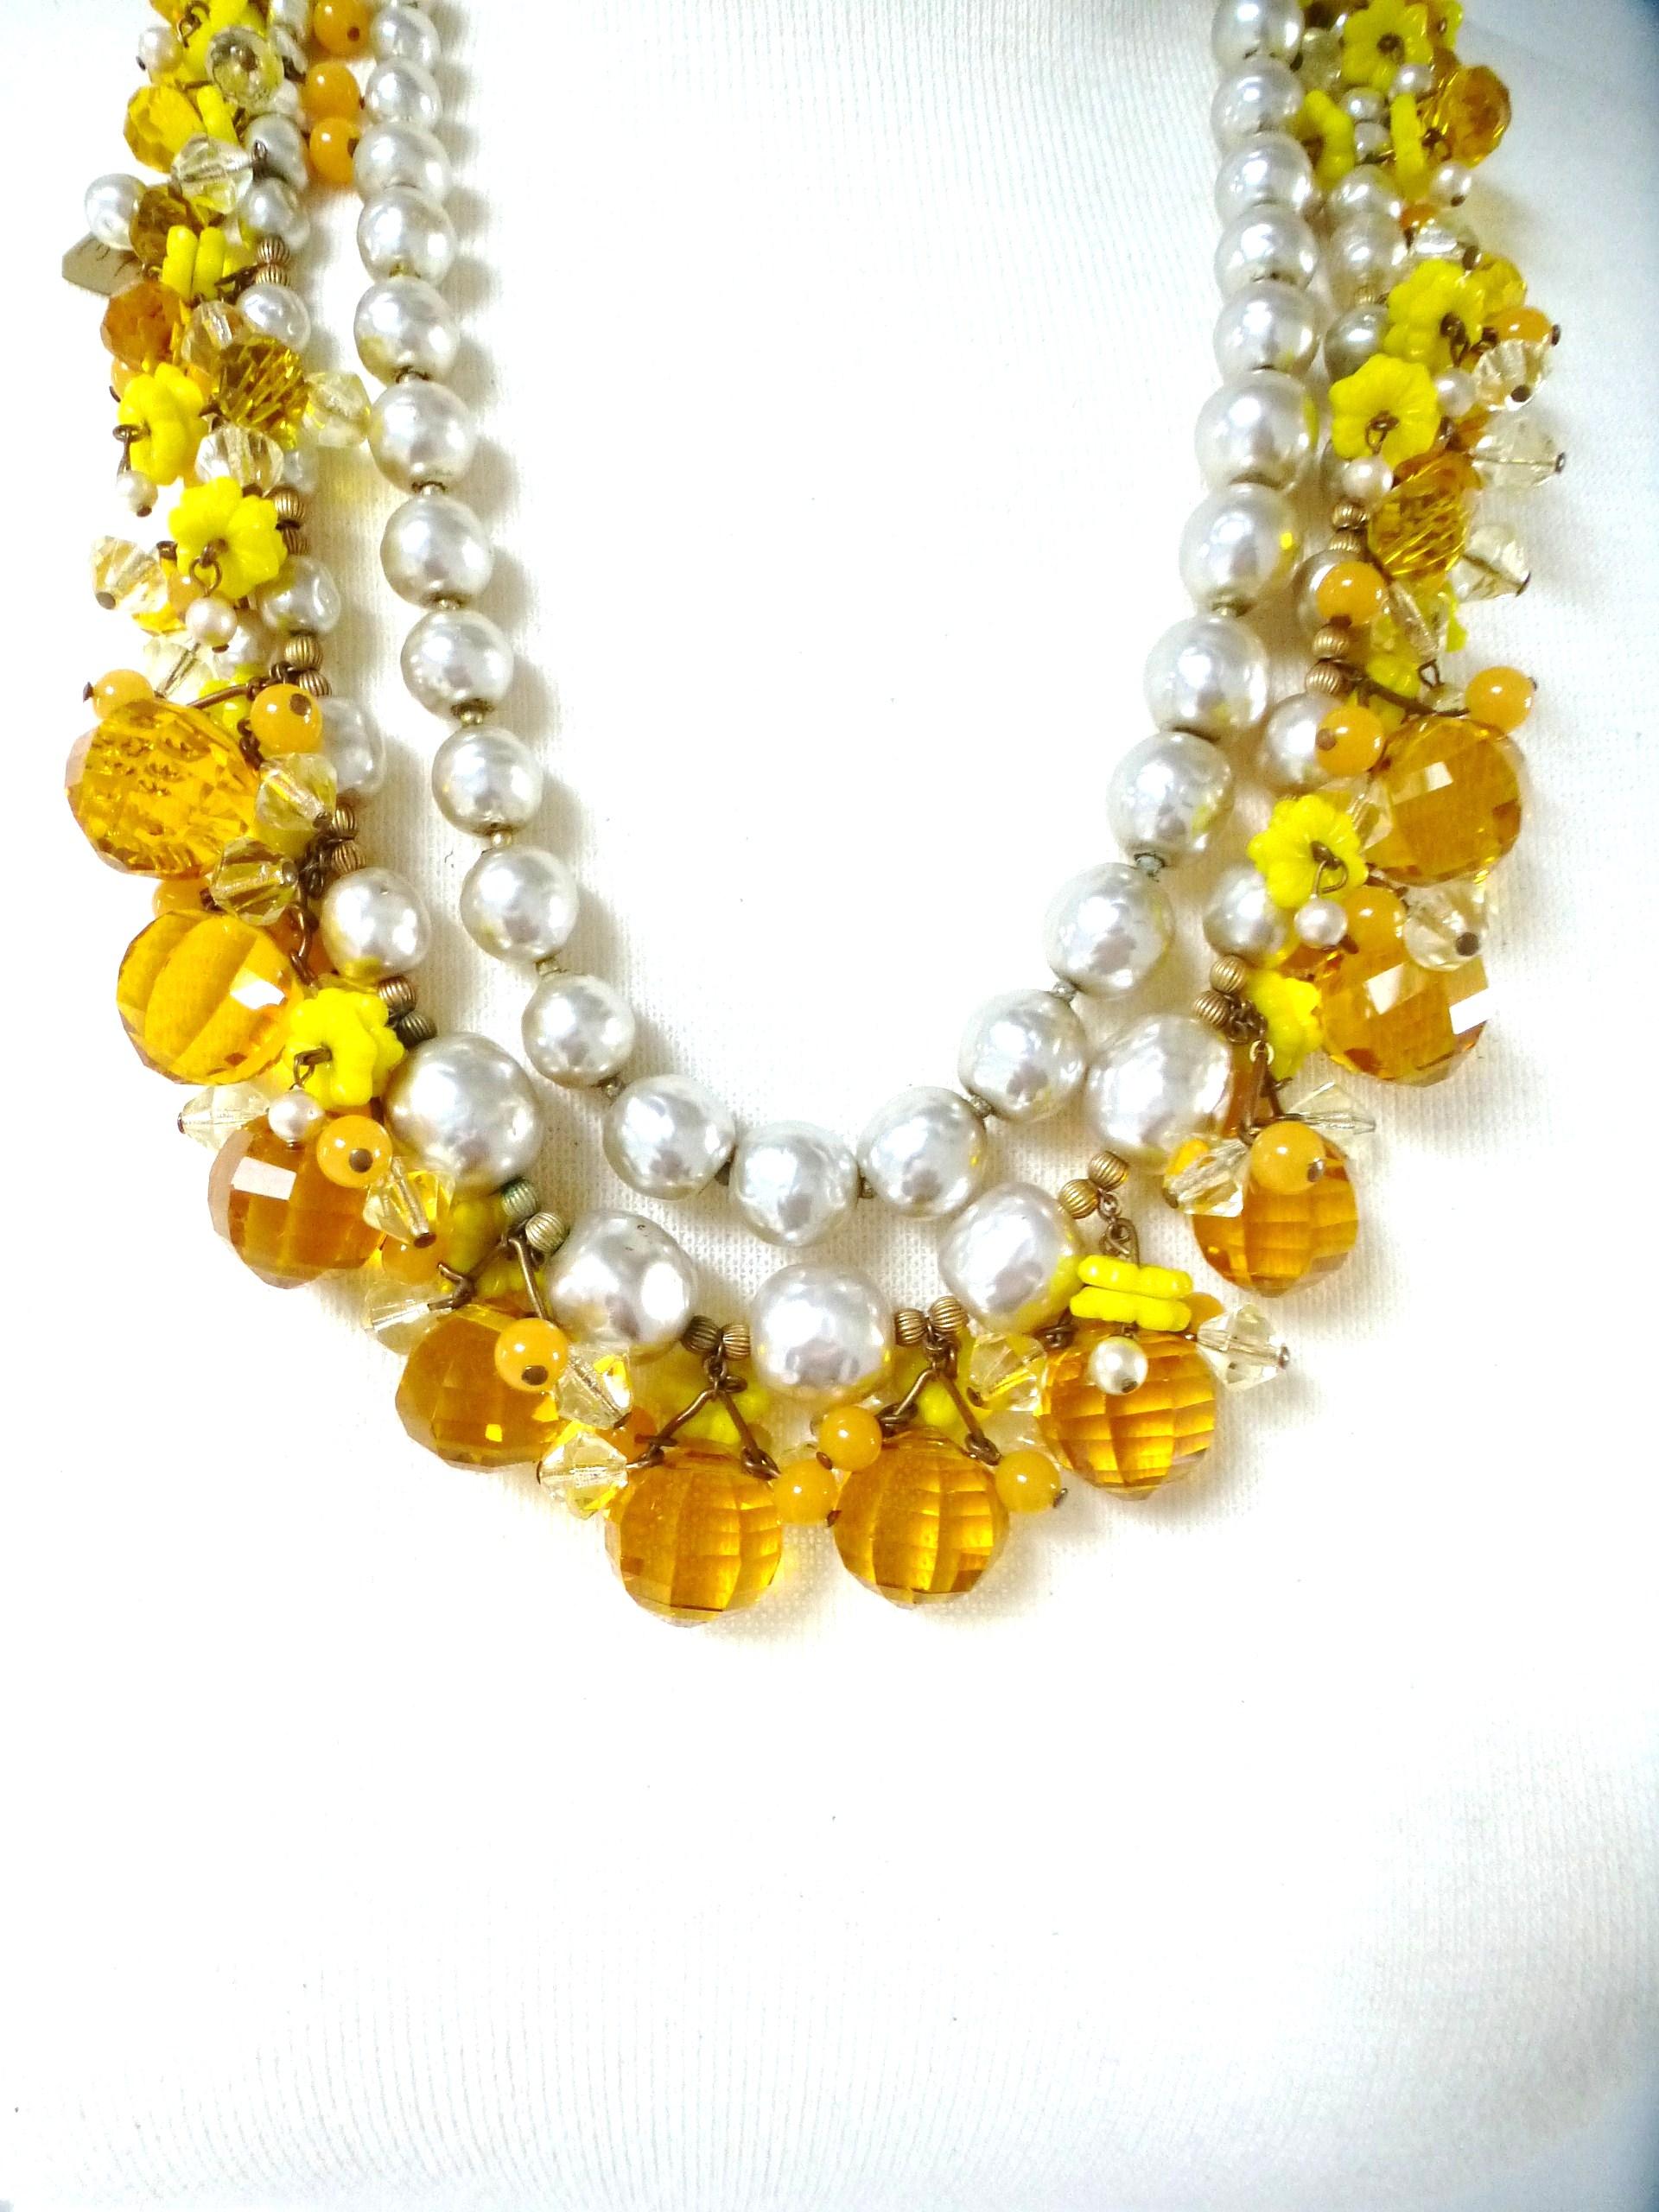 Ball Cut MIRIAM HASKELL necklace book piece 1950s with many cut yellow glass balls For Sale